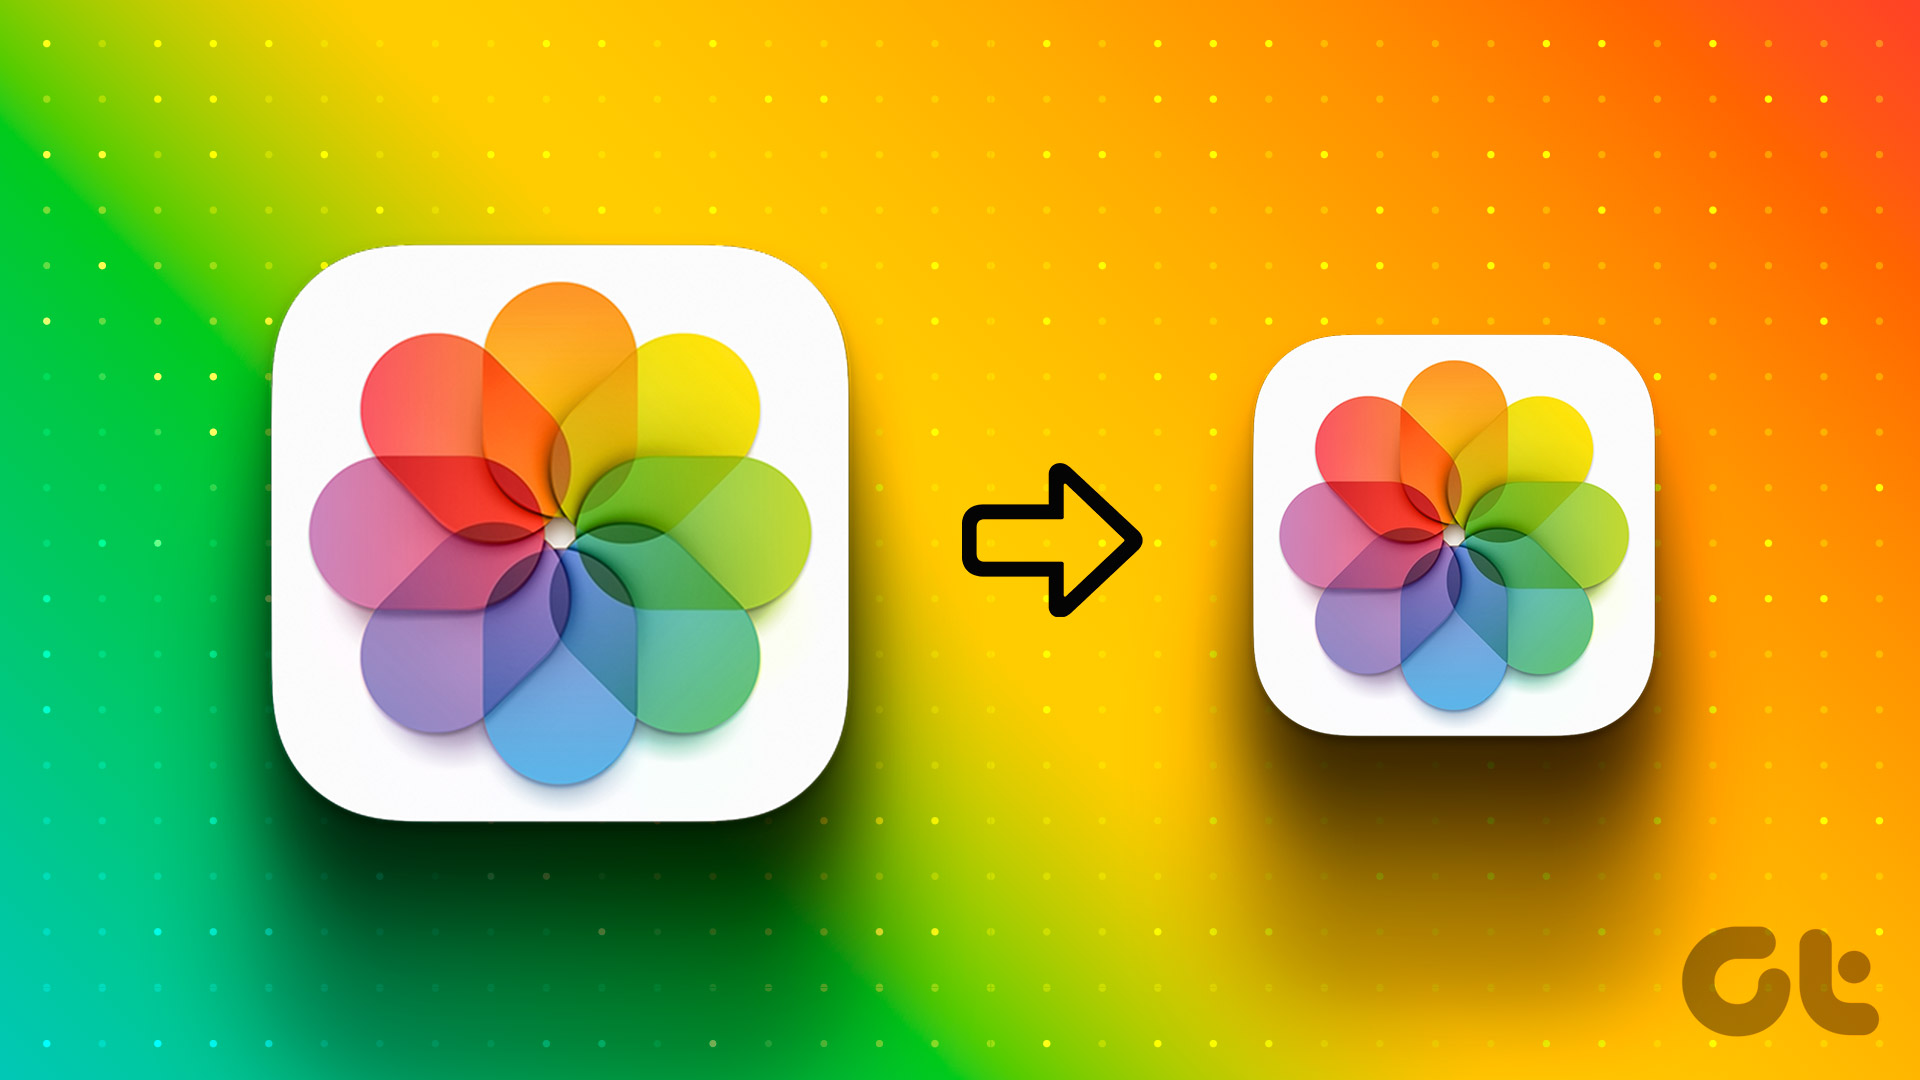 Reduce image size on iPhone and Mac